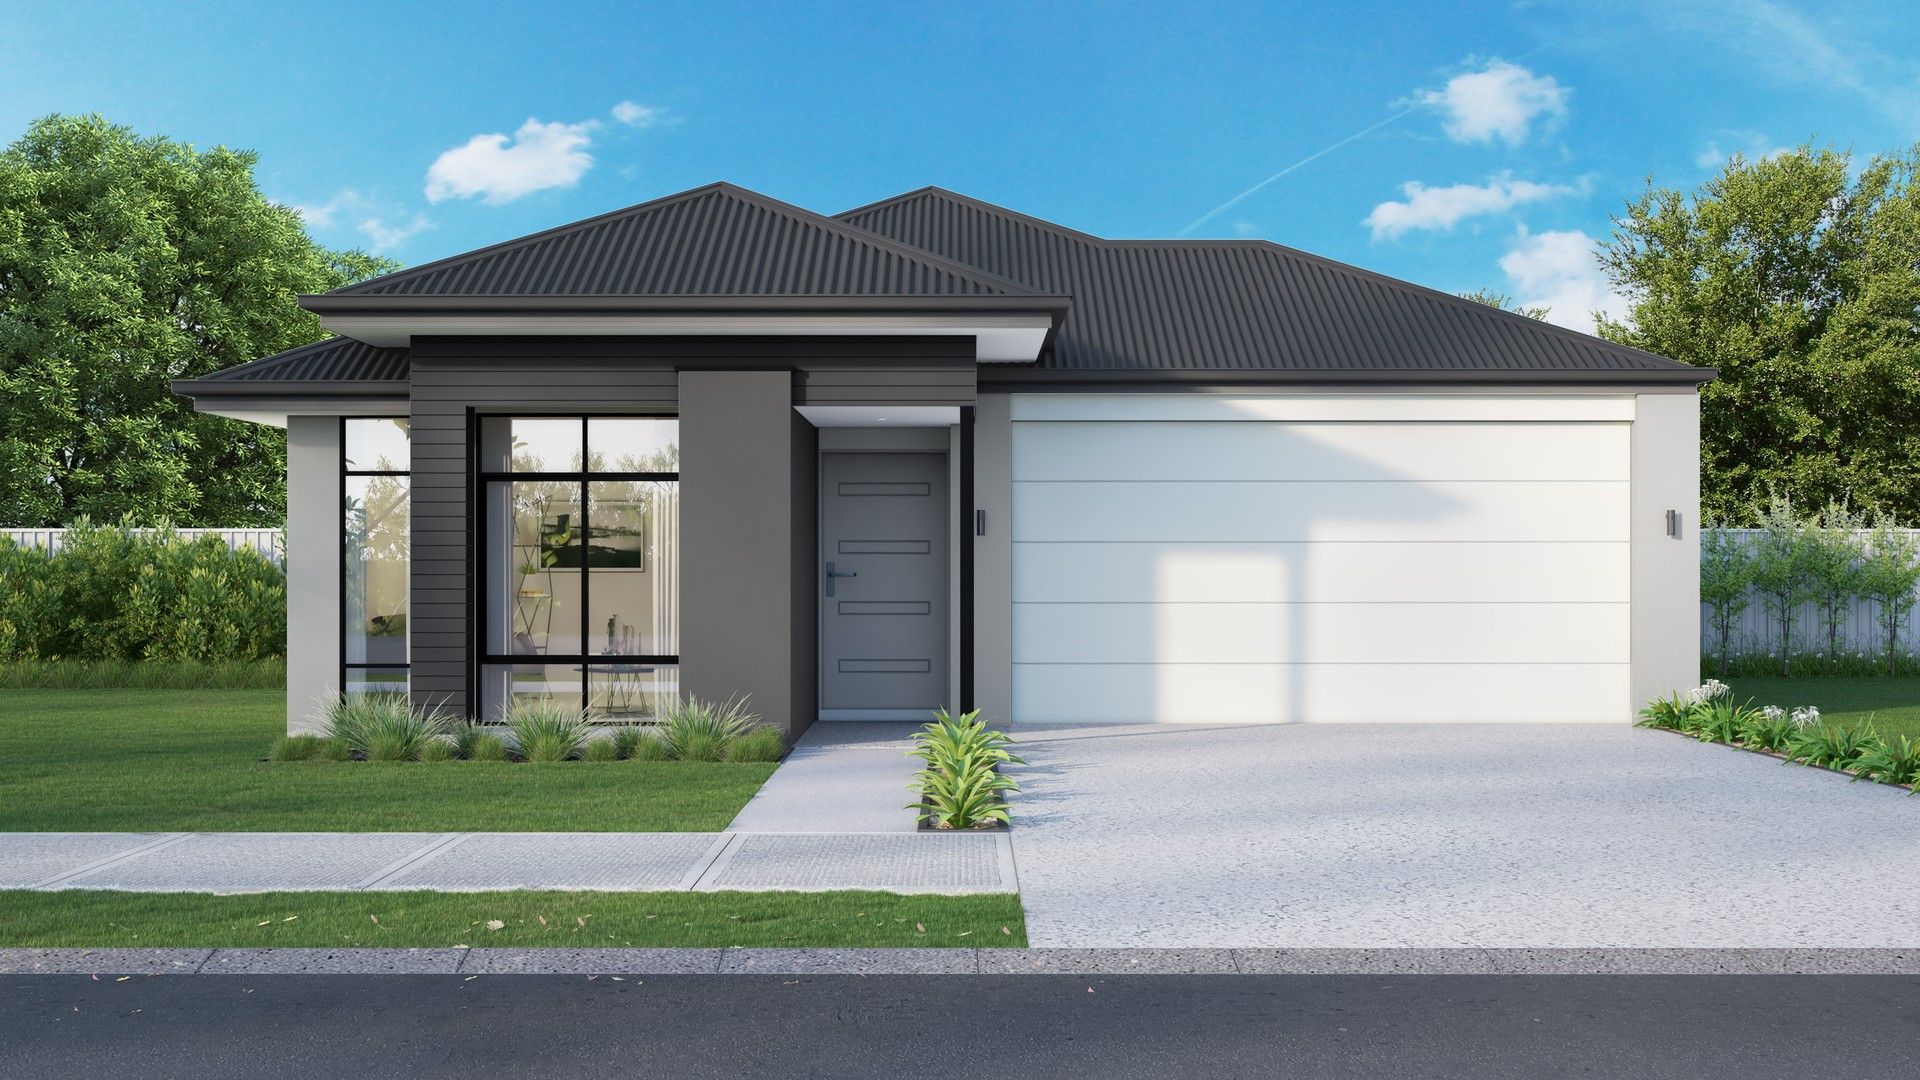 3 bedrooms New House & Land in  SINAGRA WA, 6065